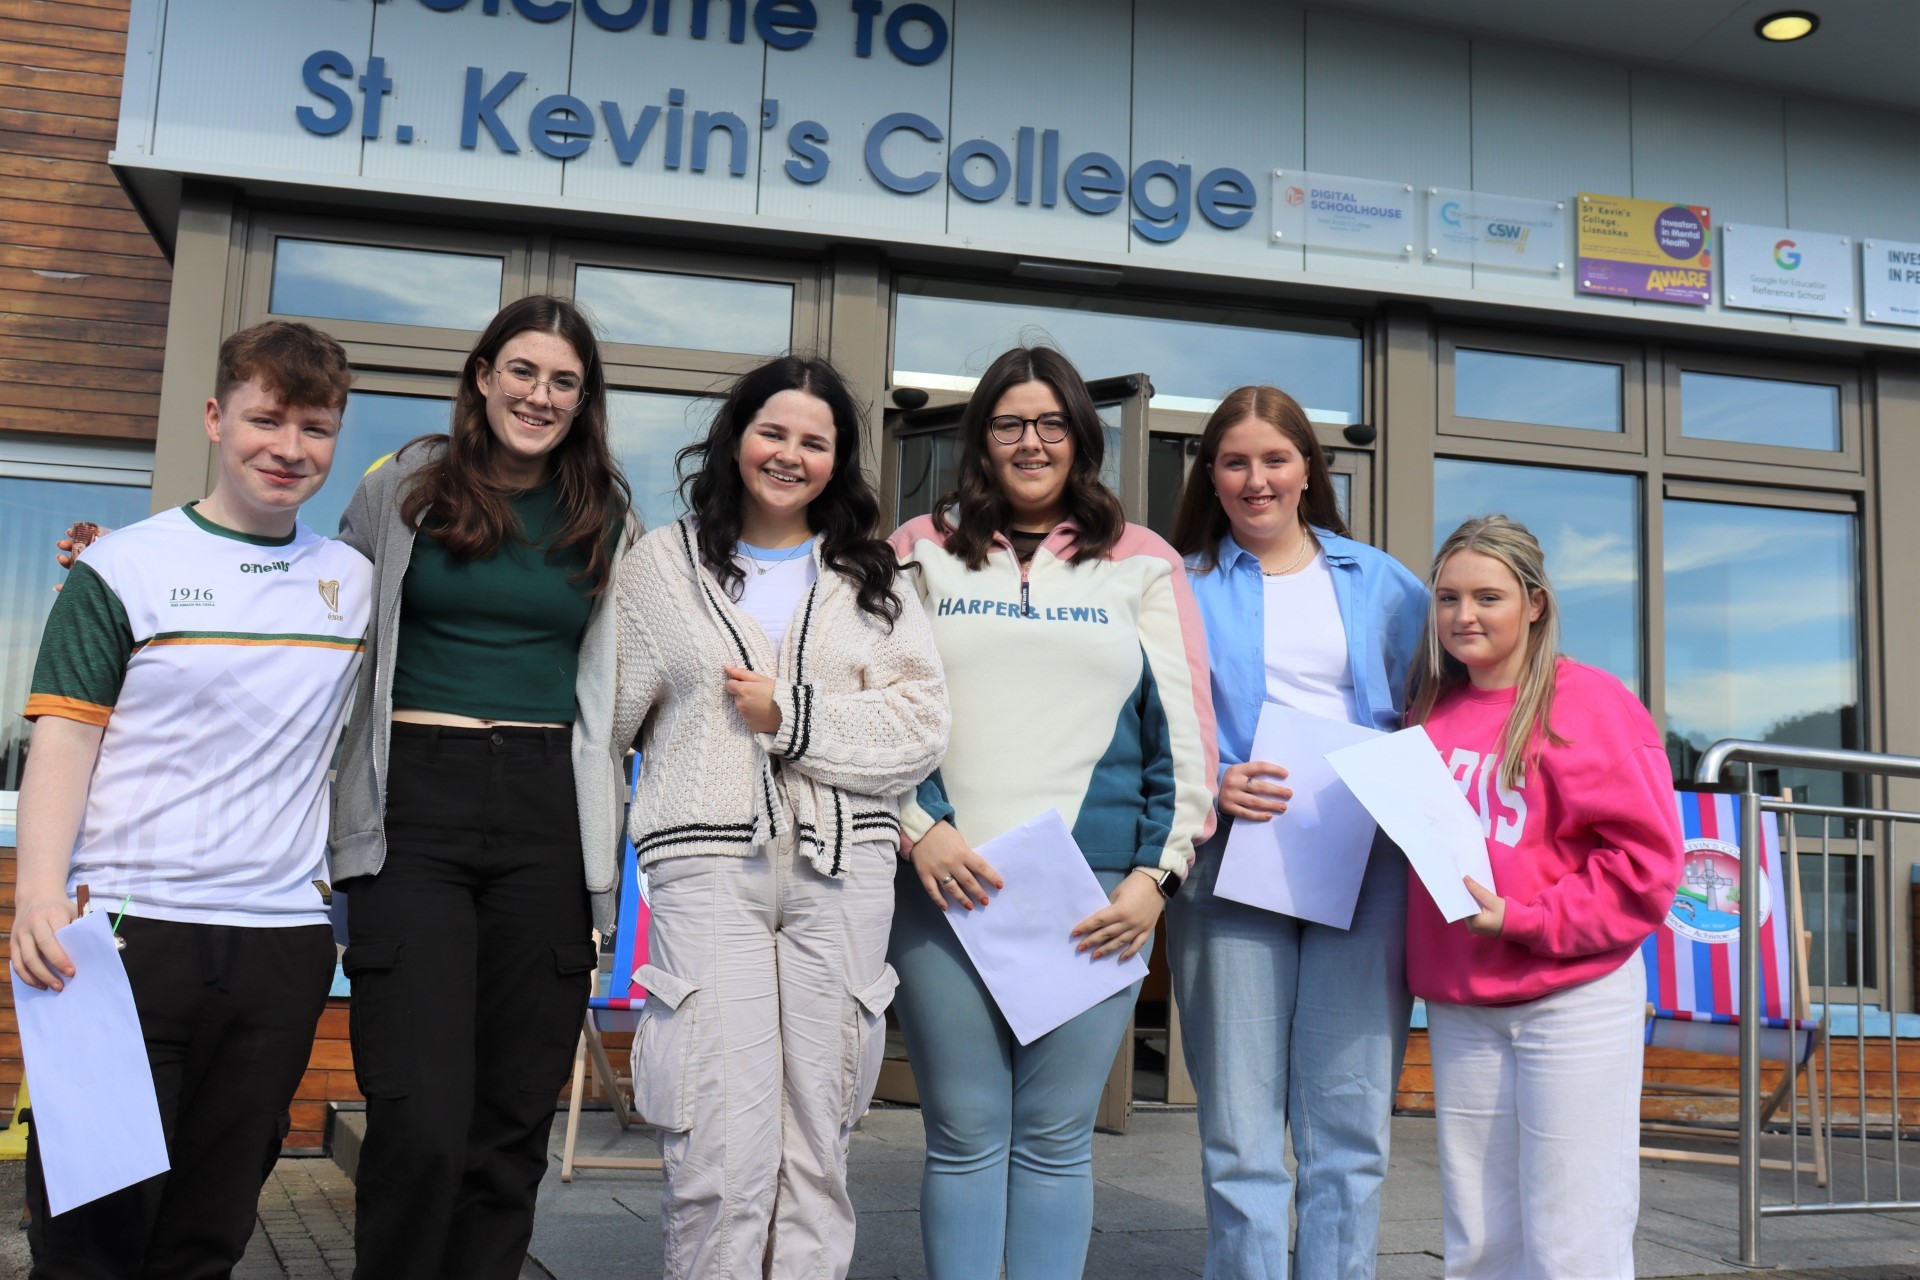 St. Kevins College A-Level students receiving their results. Pictured from left: Lonan Leonard, Joanne McElgunn, Kirsten McDermott, Ellen Faux, Kerri Creighan and Aleesha Dowd.